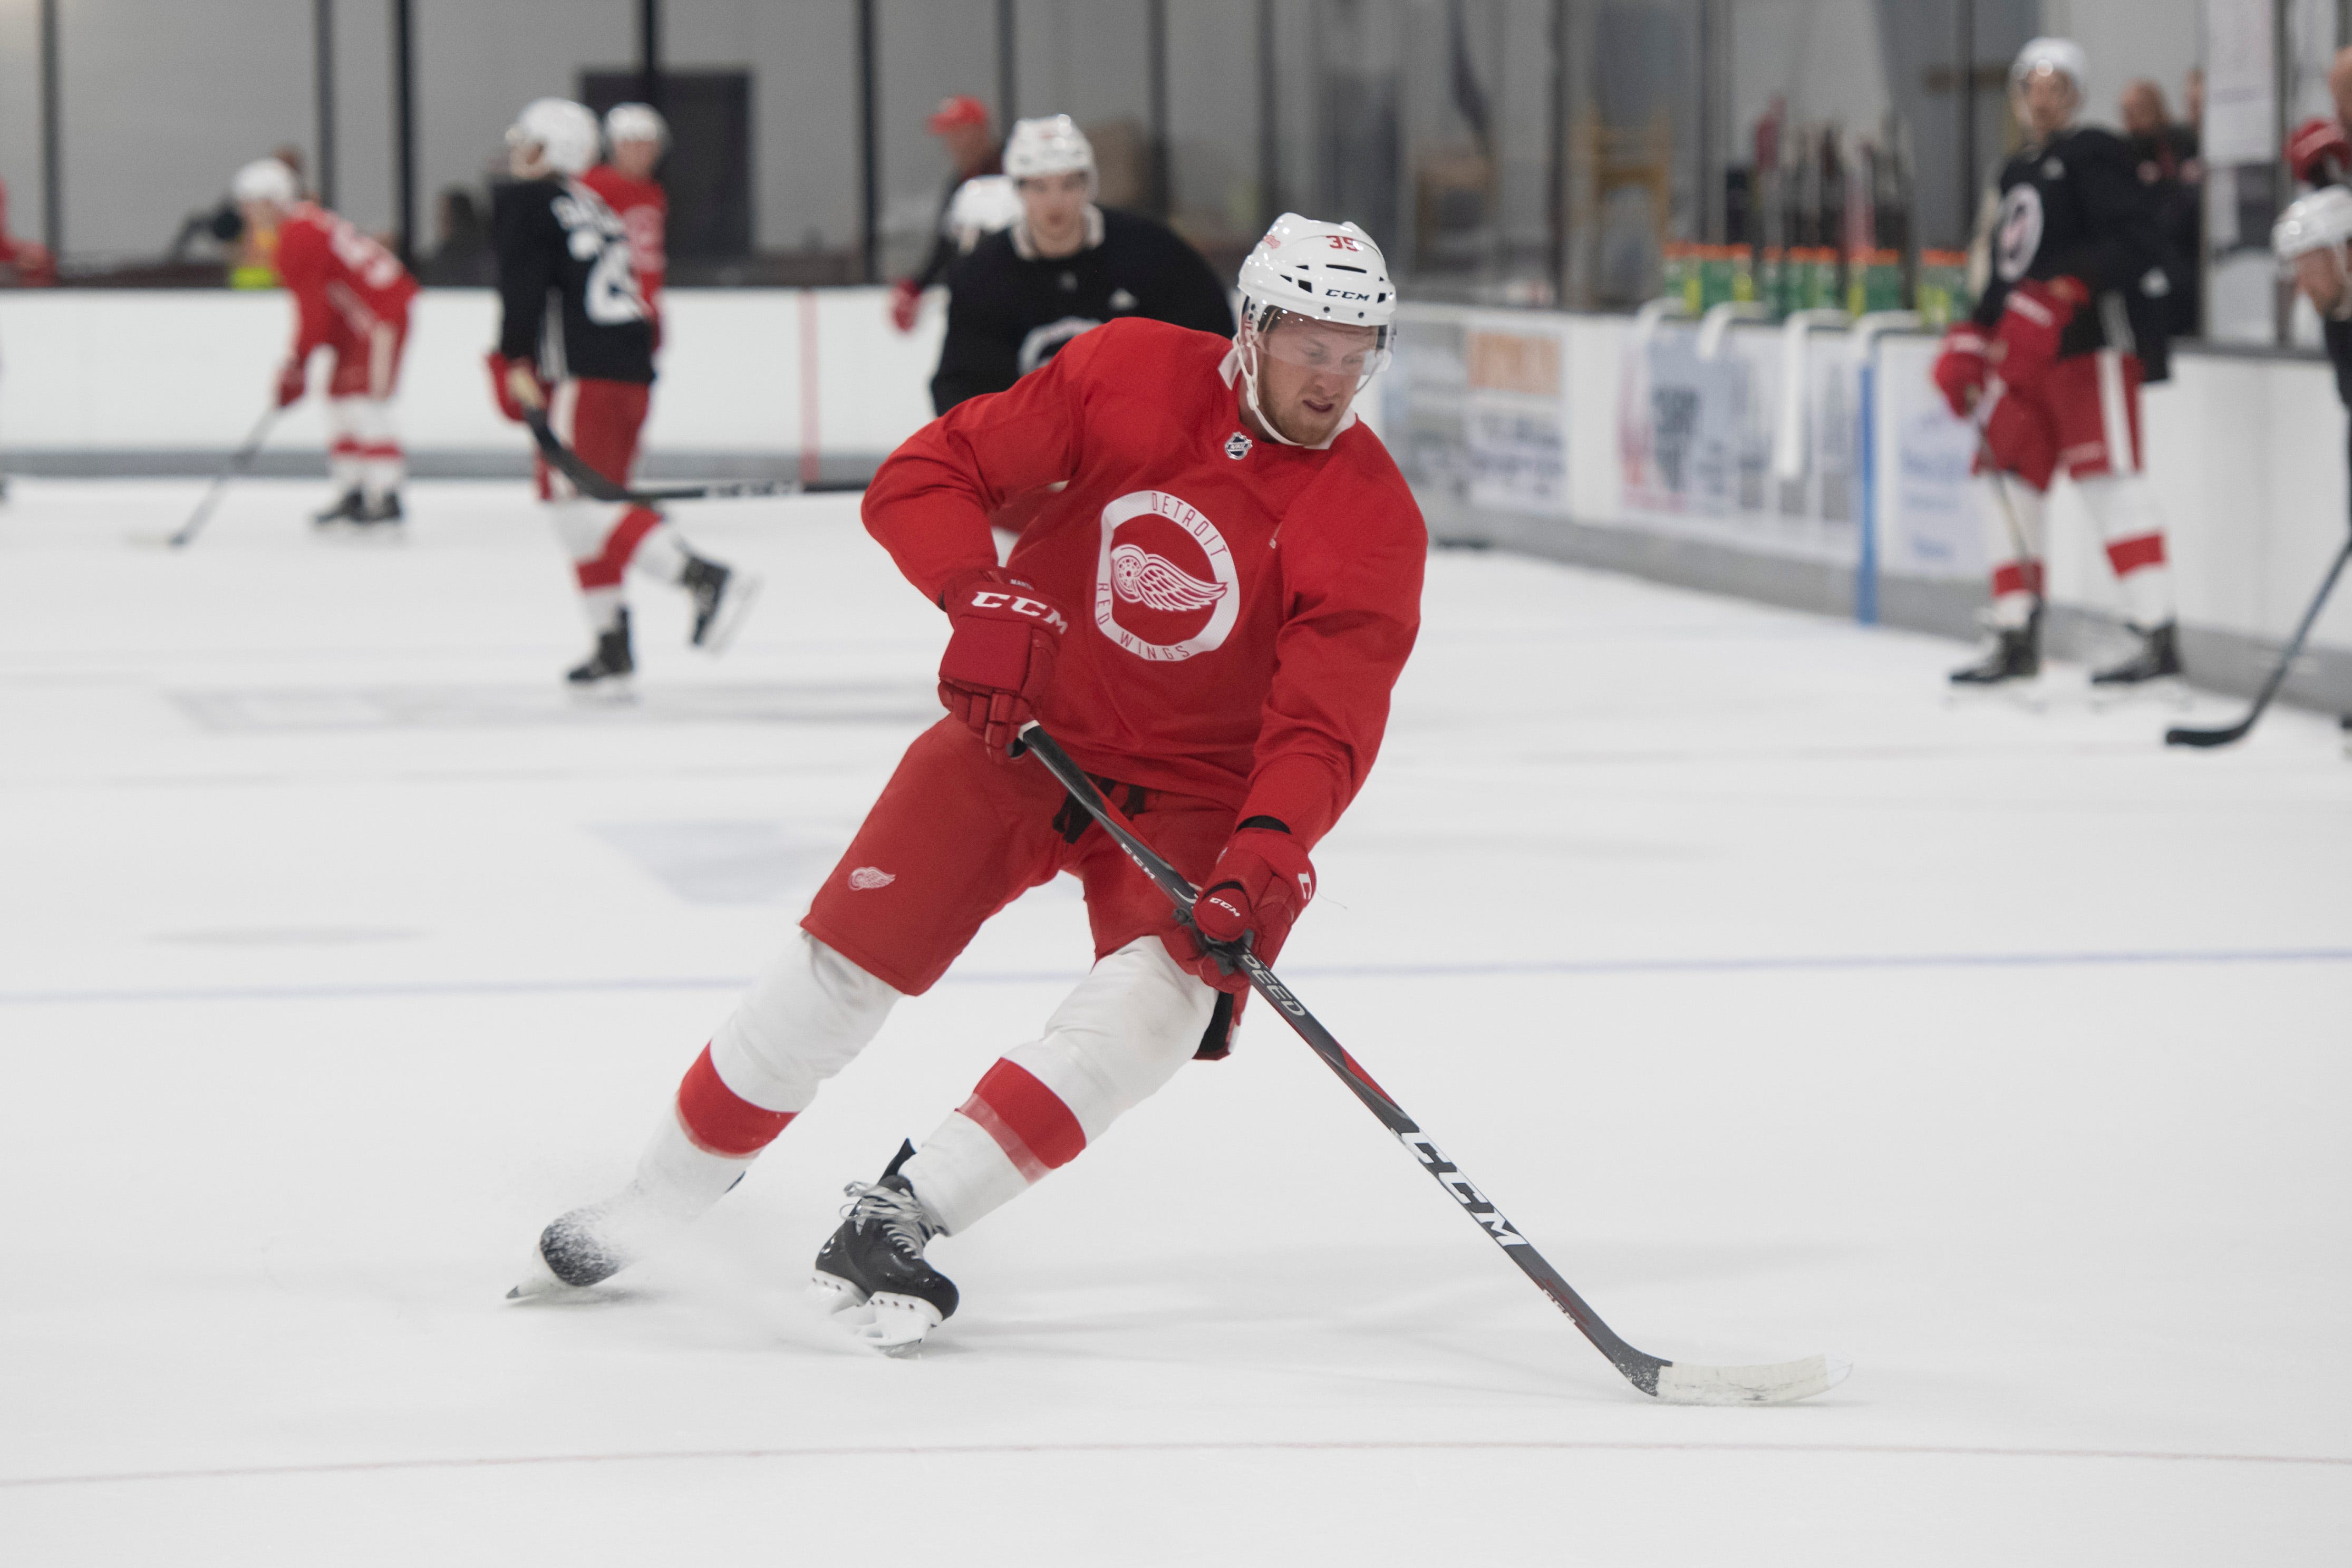 ANTHONY MANTHA: AGE: 24. HT: 6-5. WT: 225. STATS: 80 games, 24 goals, 24 assists, 48 points. ANALYSIS: Few players in the NHL have Mantha’s combination of size and goal-scoring ability. But he needs to with play with consistent passion and can’t disappear from scoresheets for long periods of time.